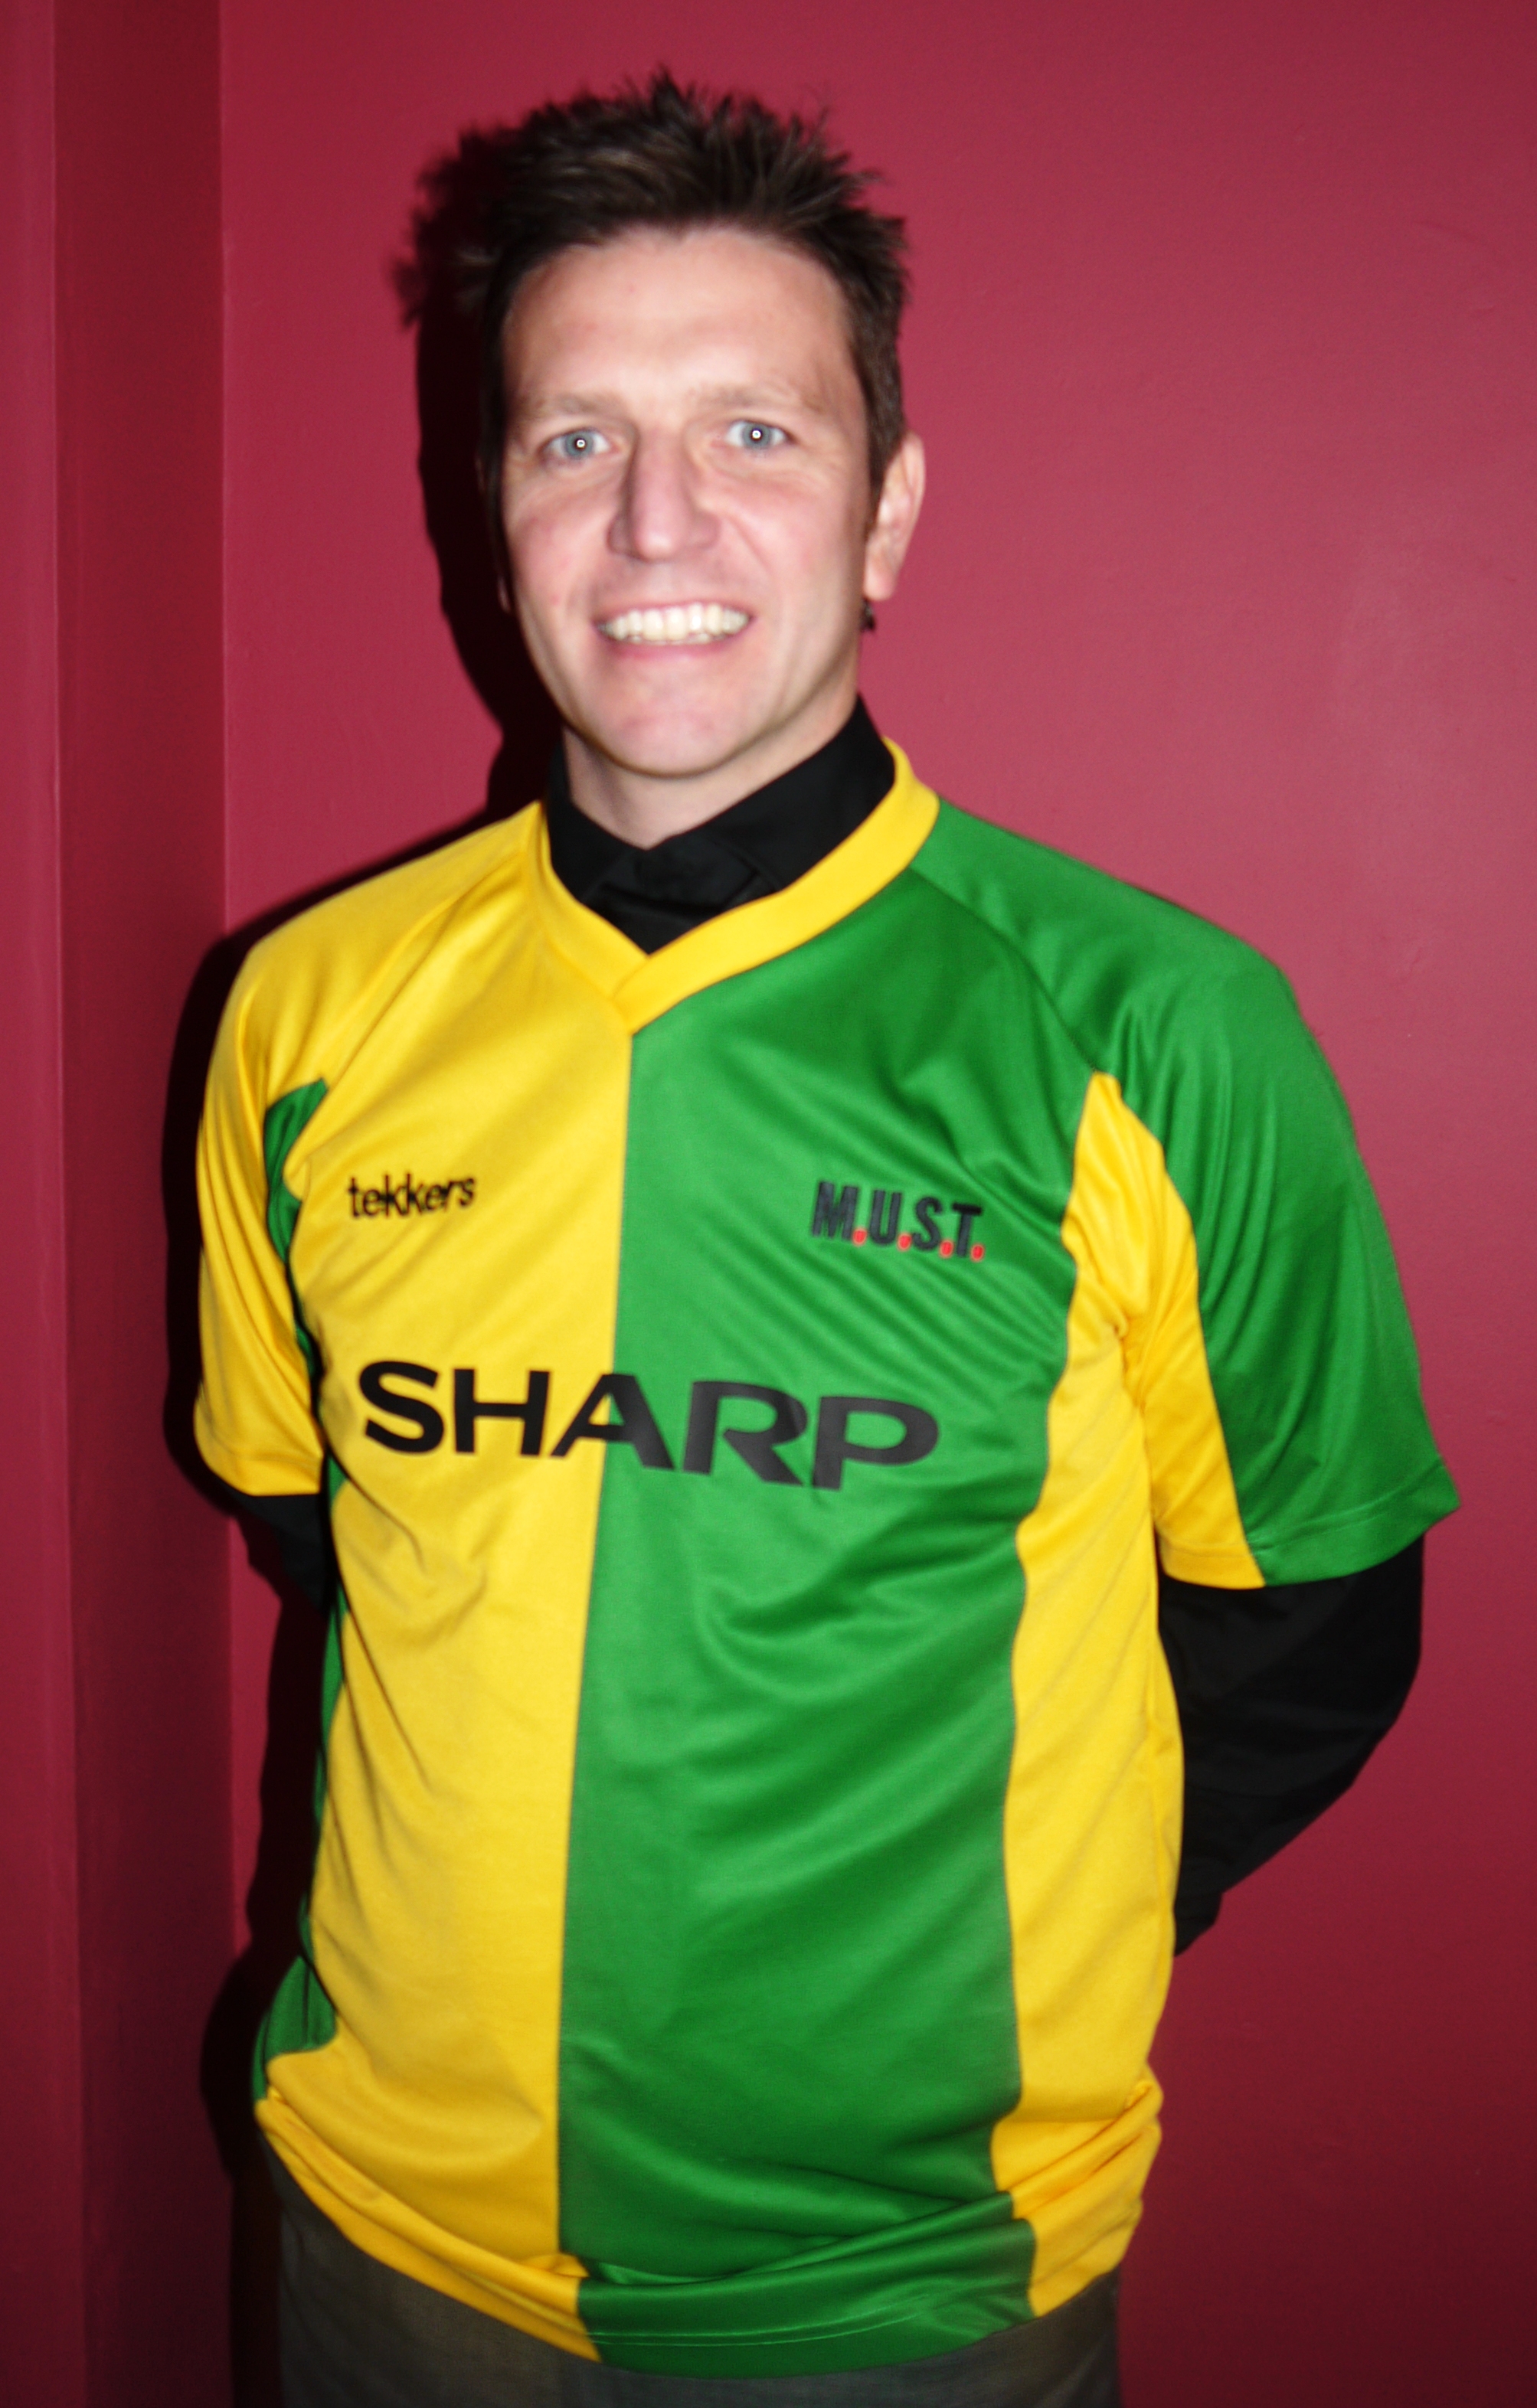 manchester united green and yellow jersey